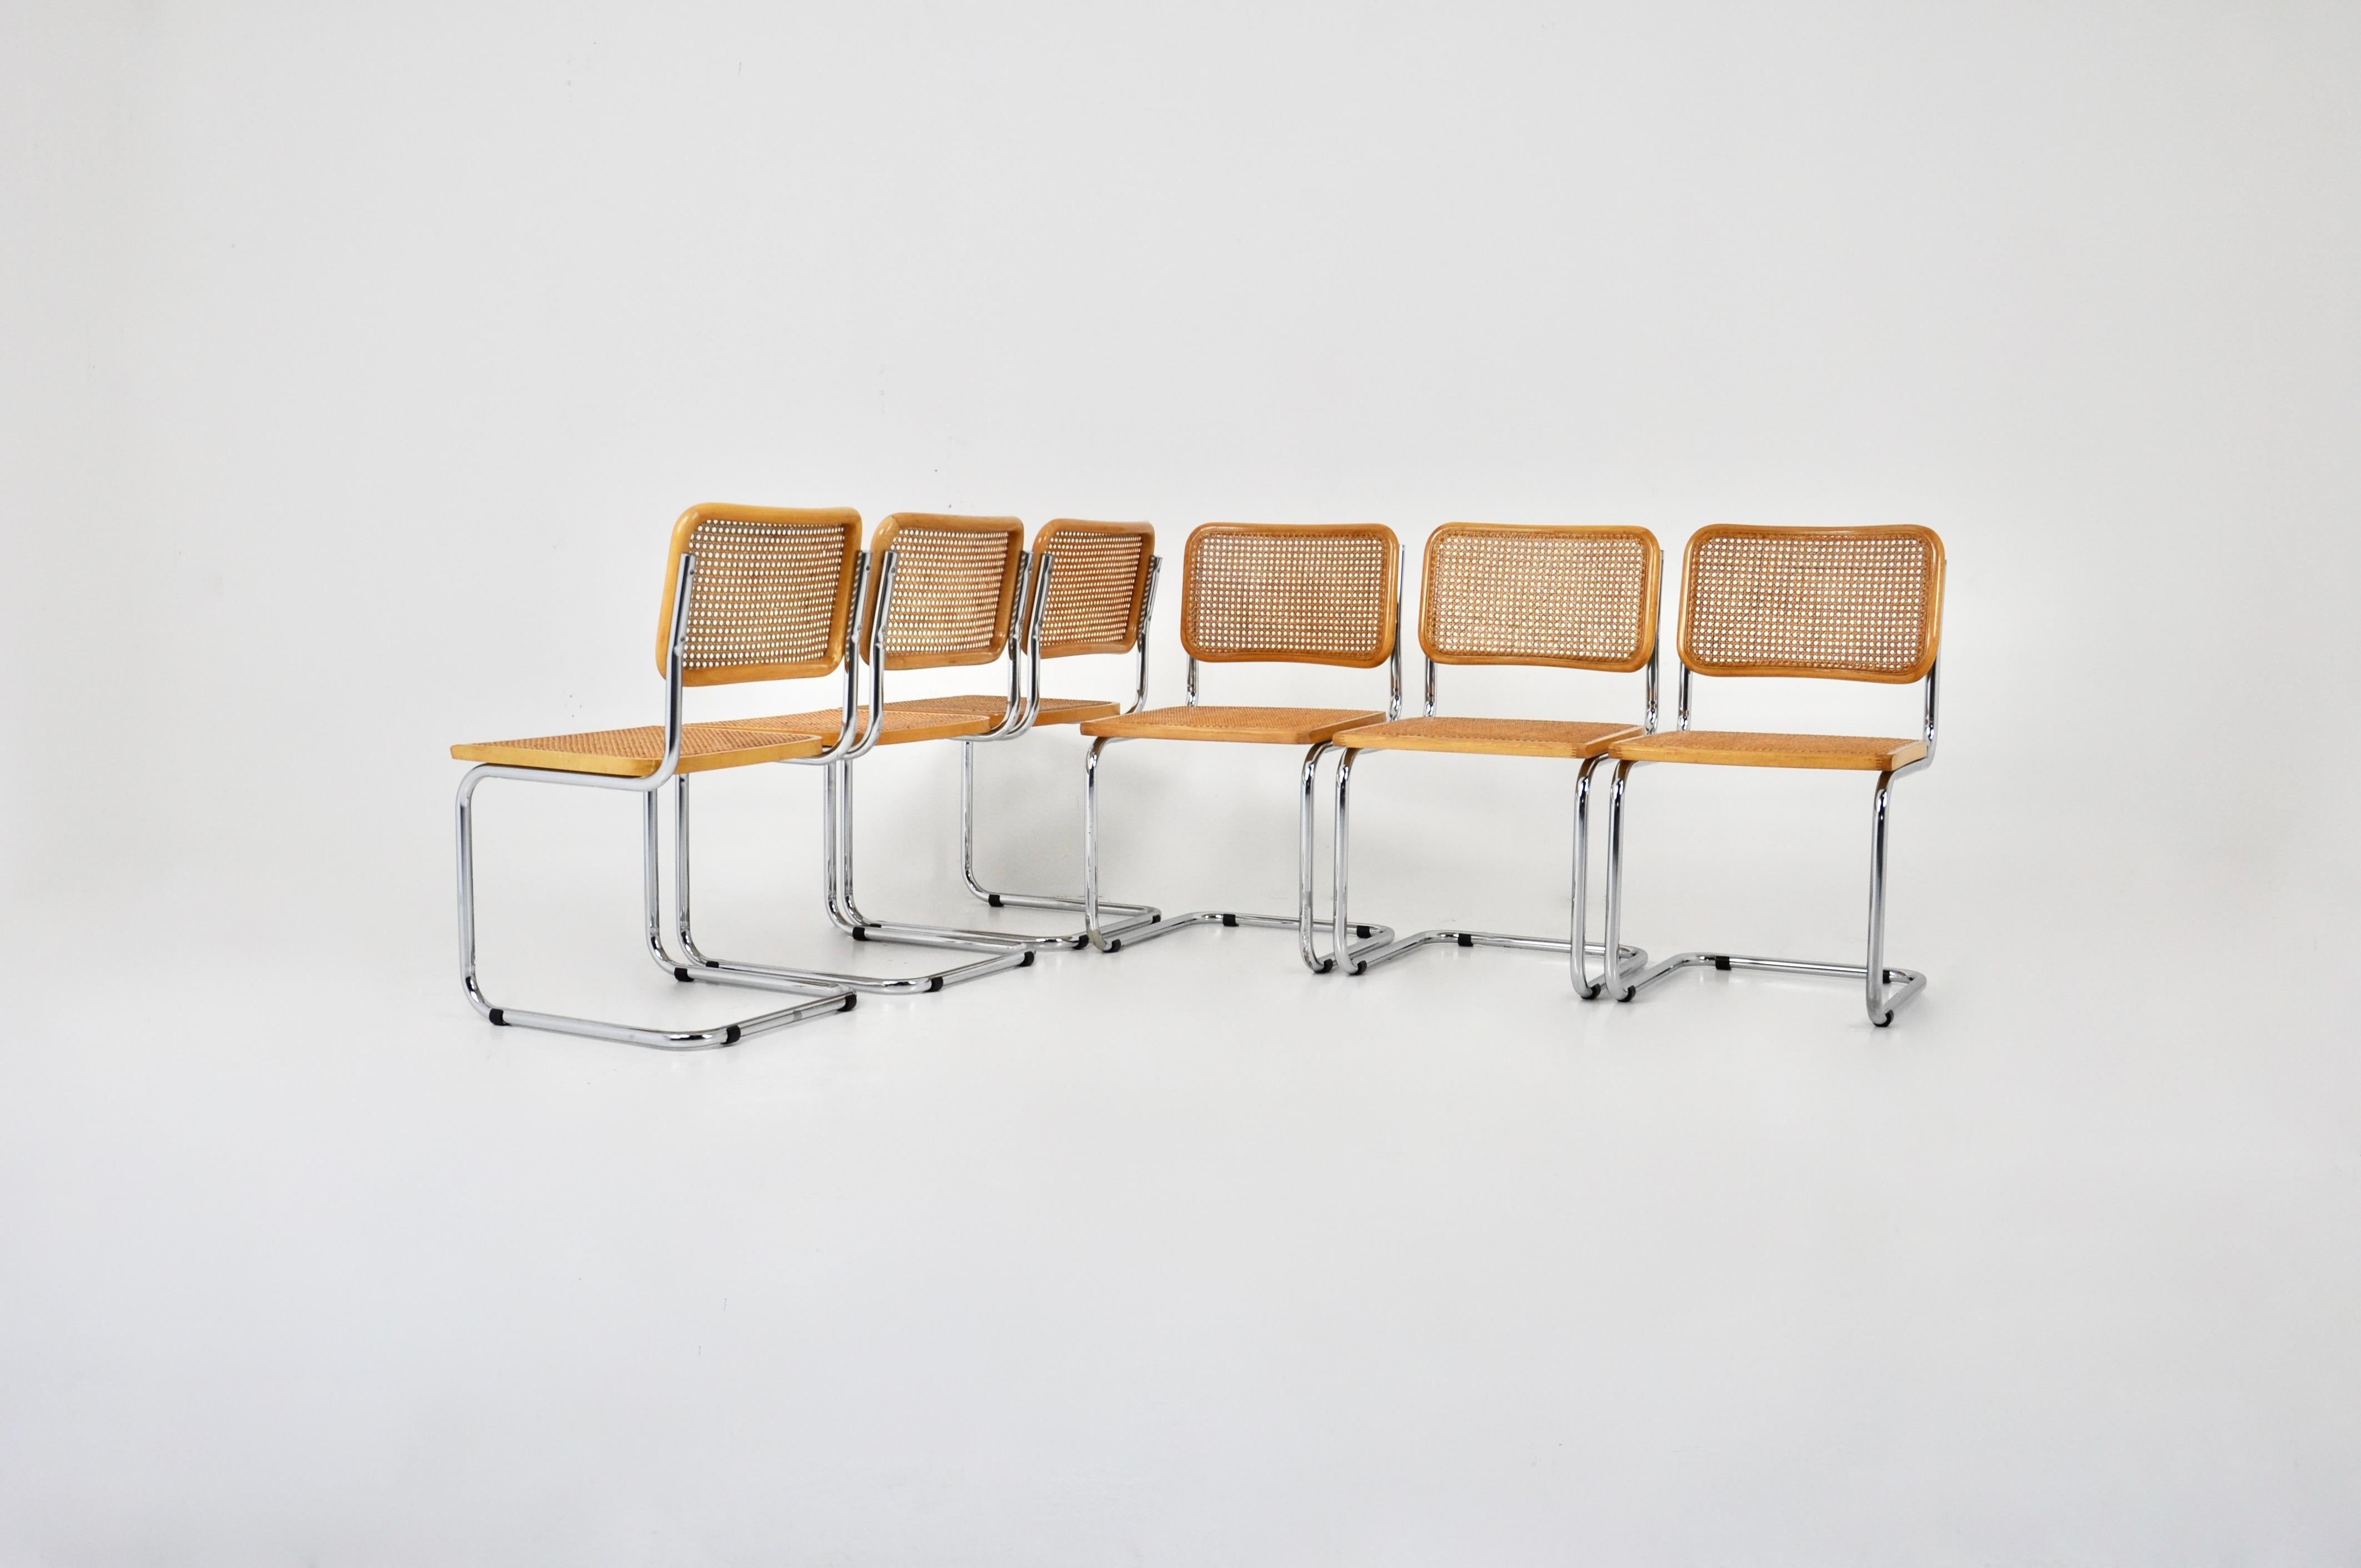 Set of 6 chairs in metal, wood and rattan. Dimensions: seat height: 44 cm. Wear due to time and age of the chairs. Sold by 6, the set cannot be divided.
 